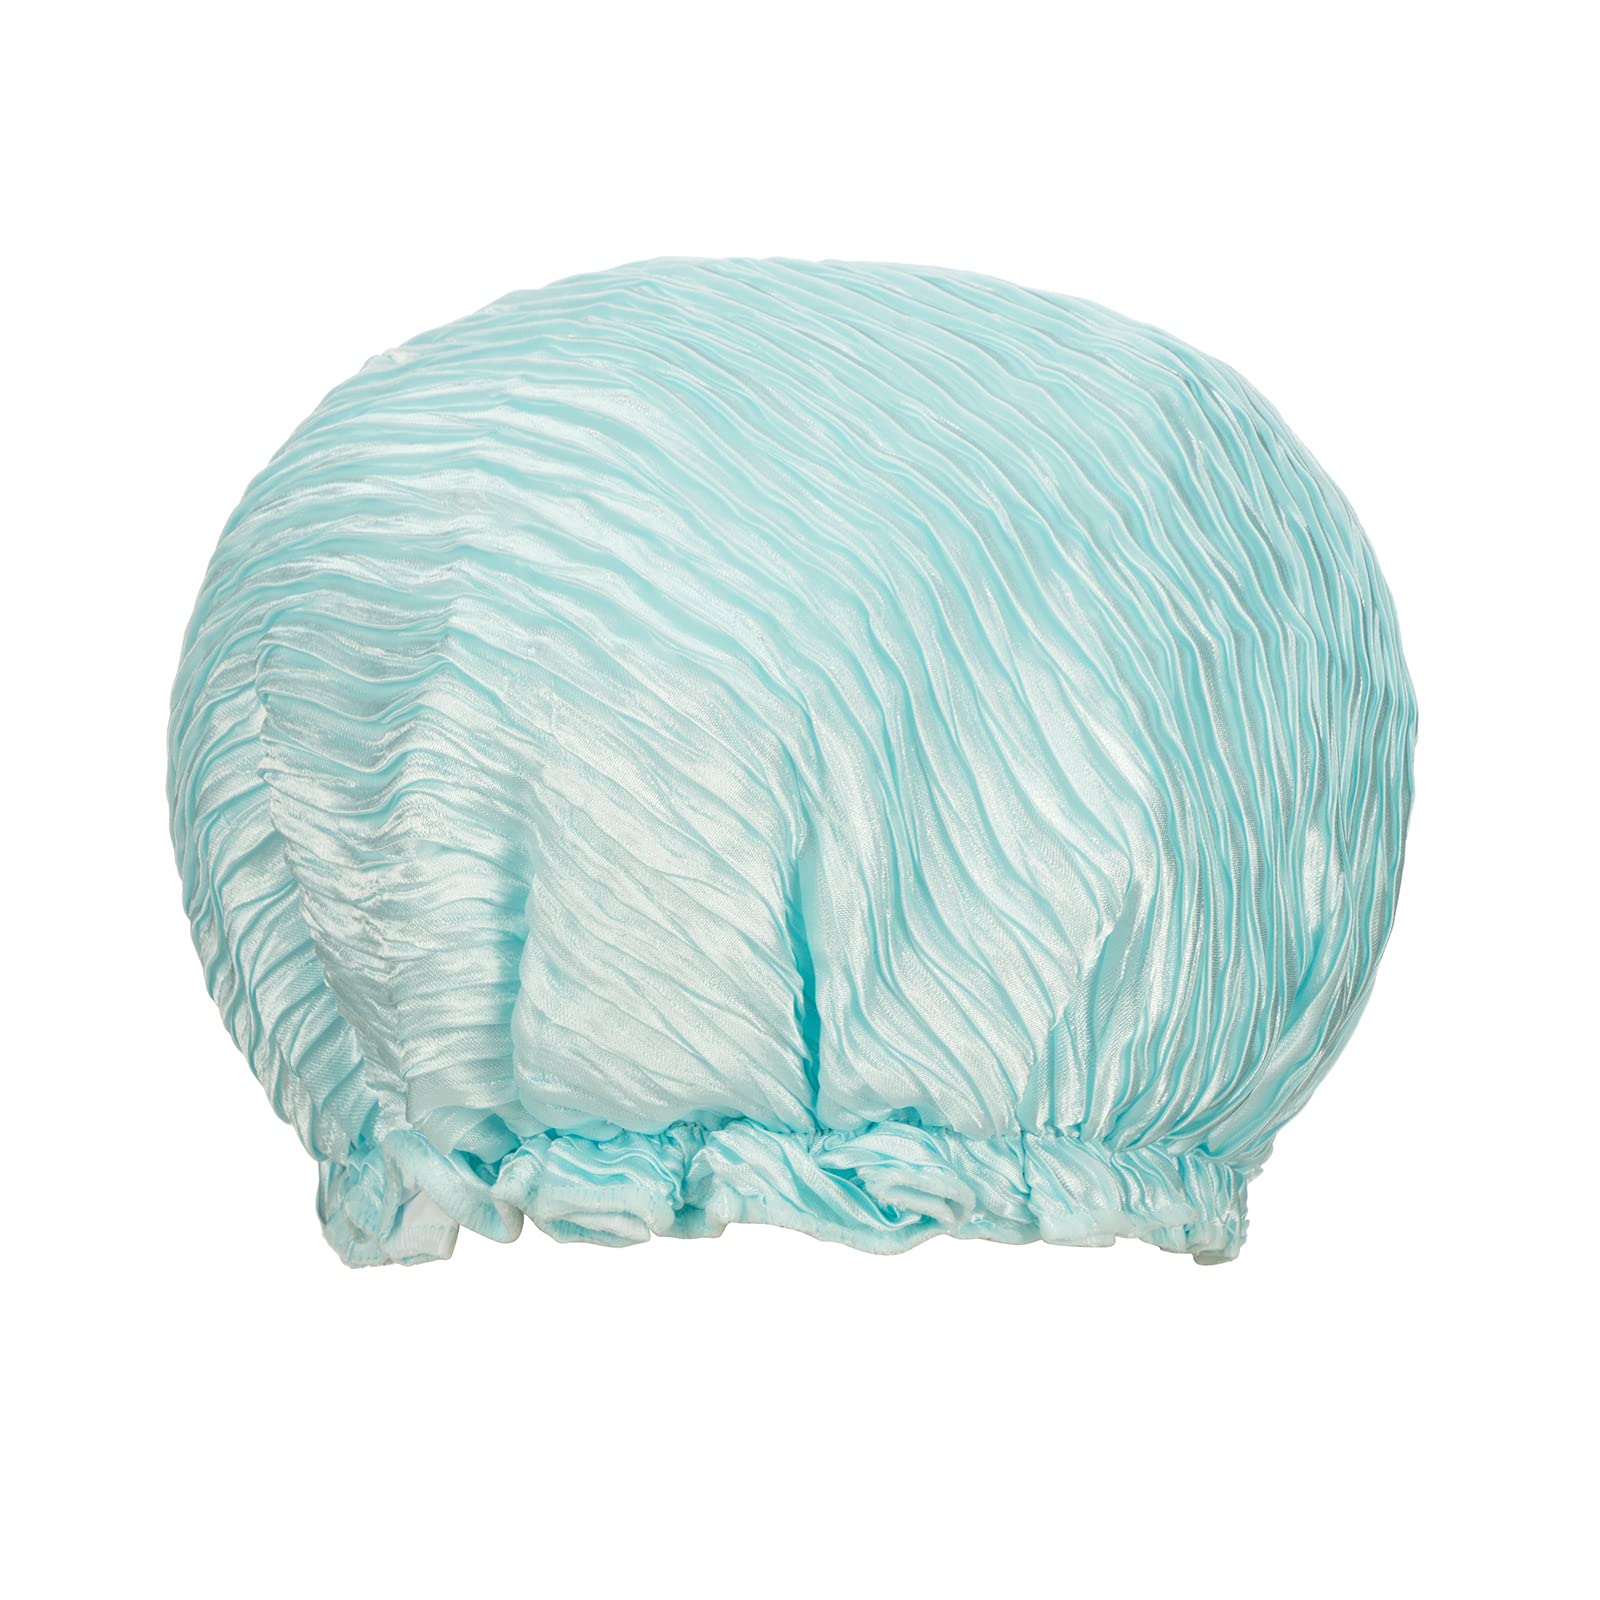 KISMETICS - Crinkled Shower Cap, Large & Reusable Double Layer Shower Cap Lined with Waterproof Material, Pleated Fabric with Ruffle Trim, Large Size for All Hair Lengths (Blue)